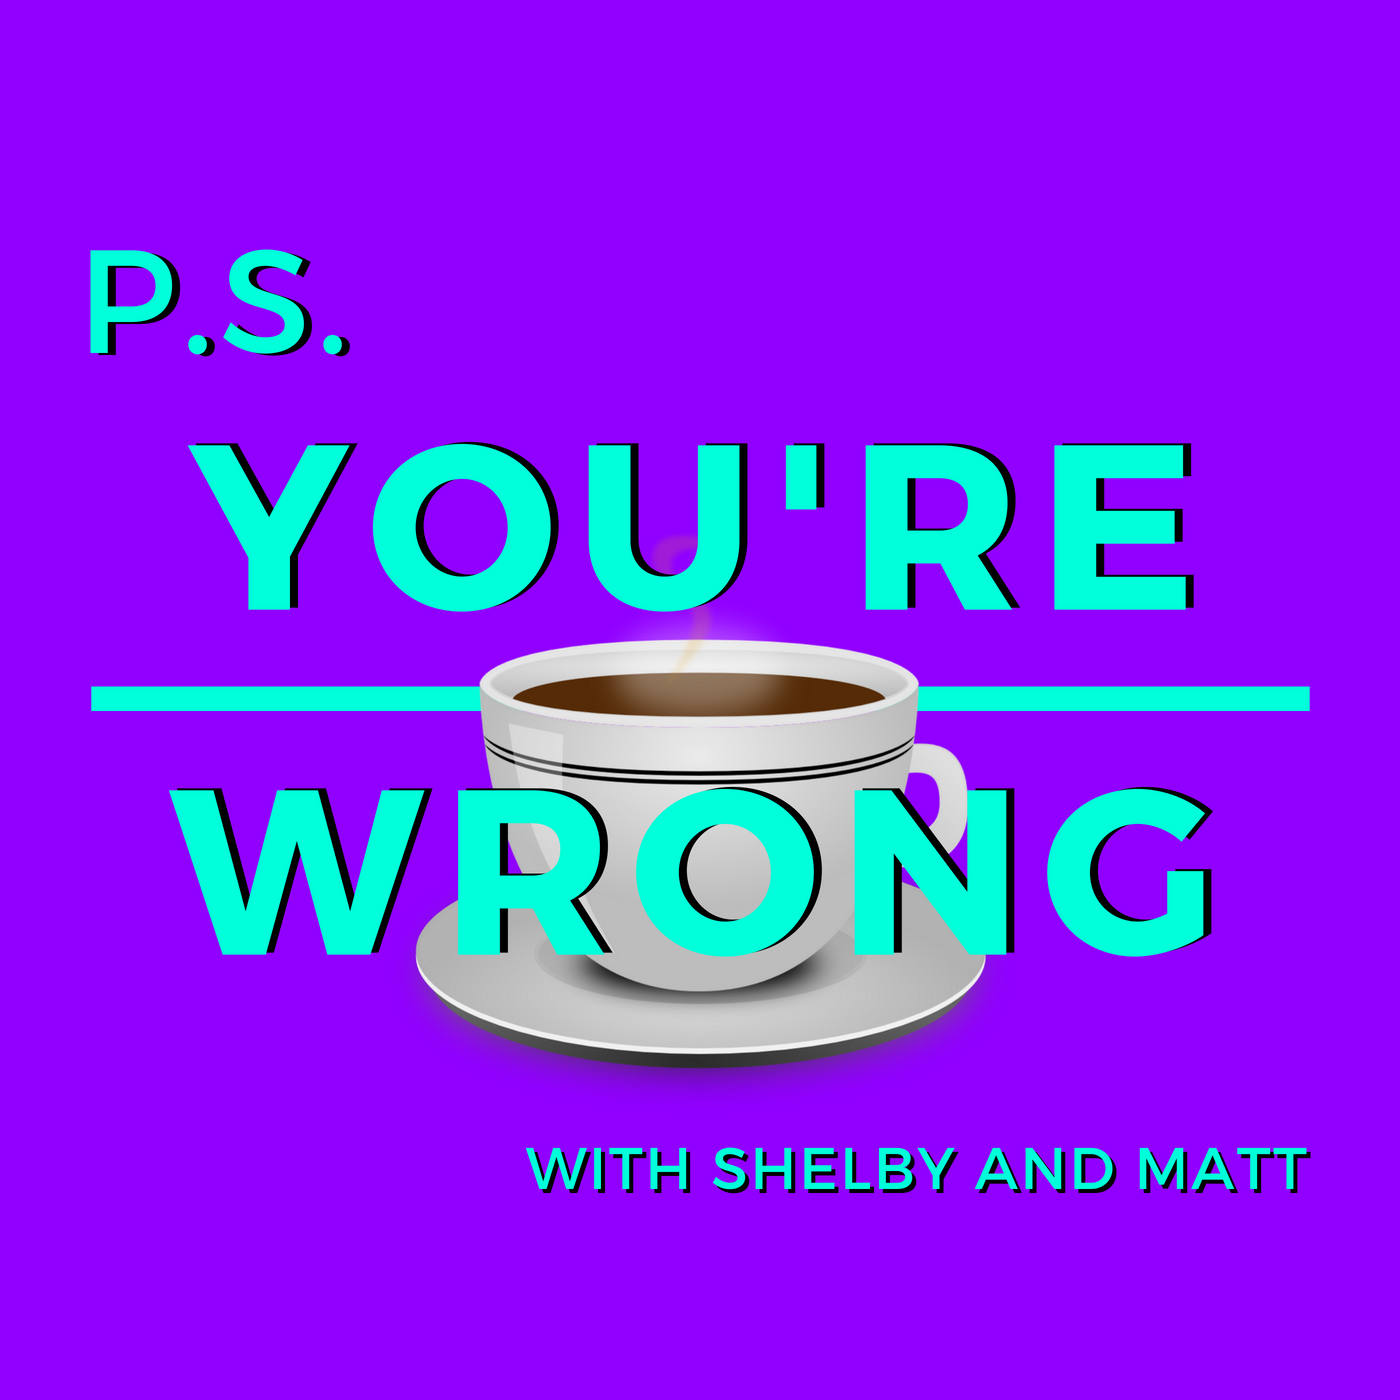 P.S. You're Wrong About: Lady Gaga (Episode 160 - Birthday Special) 